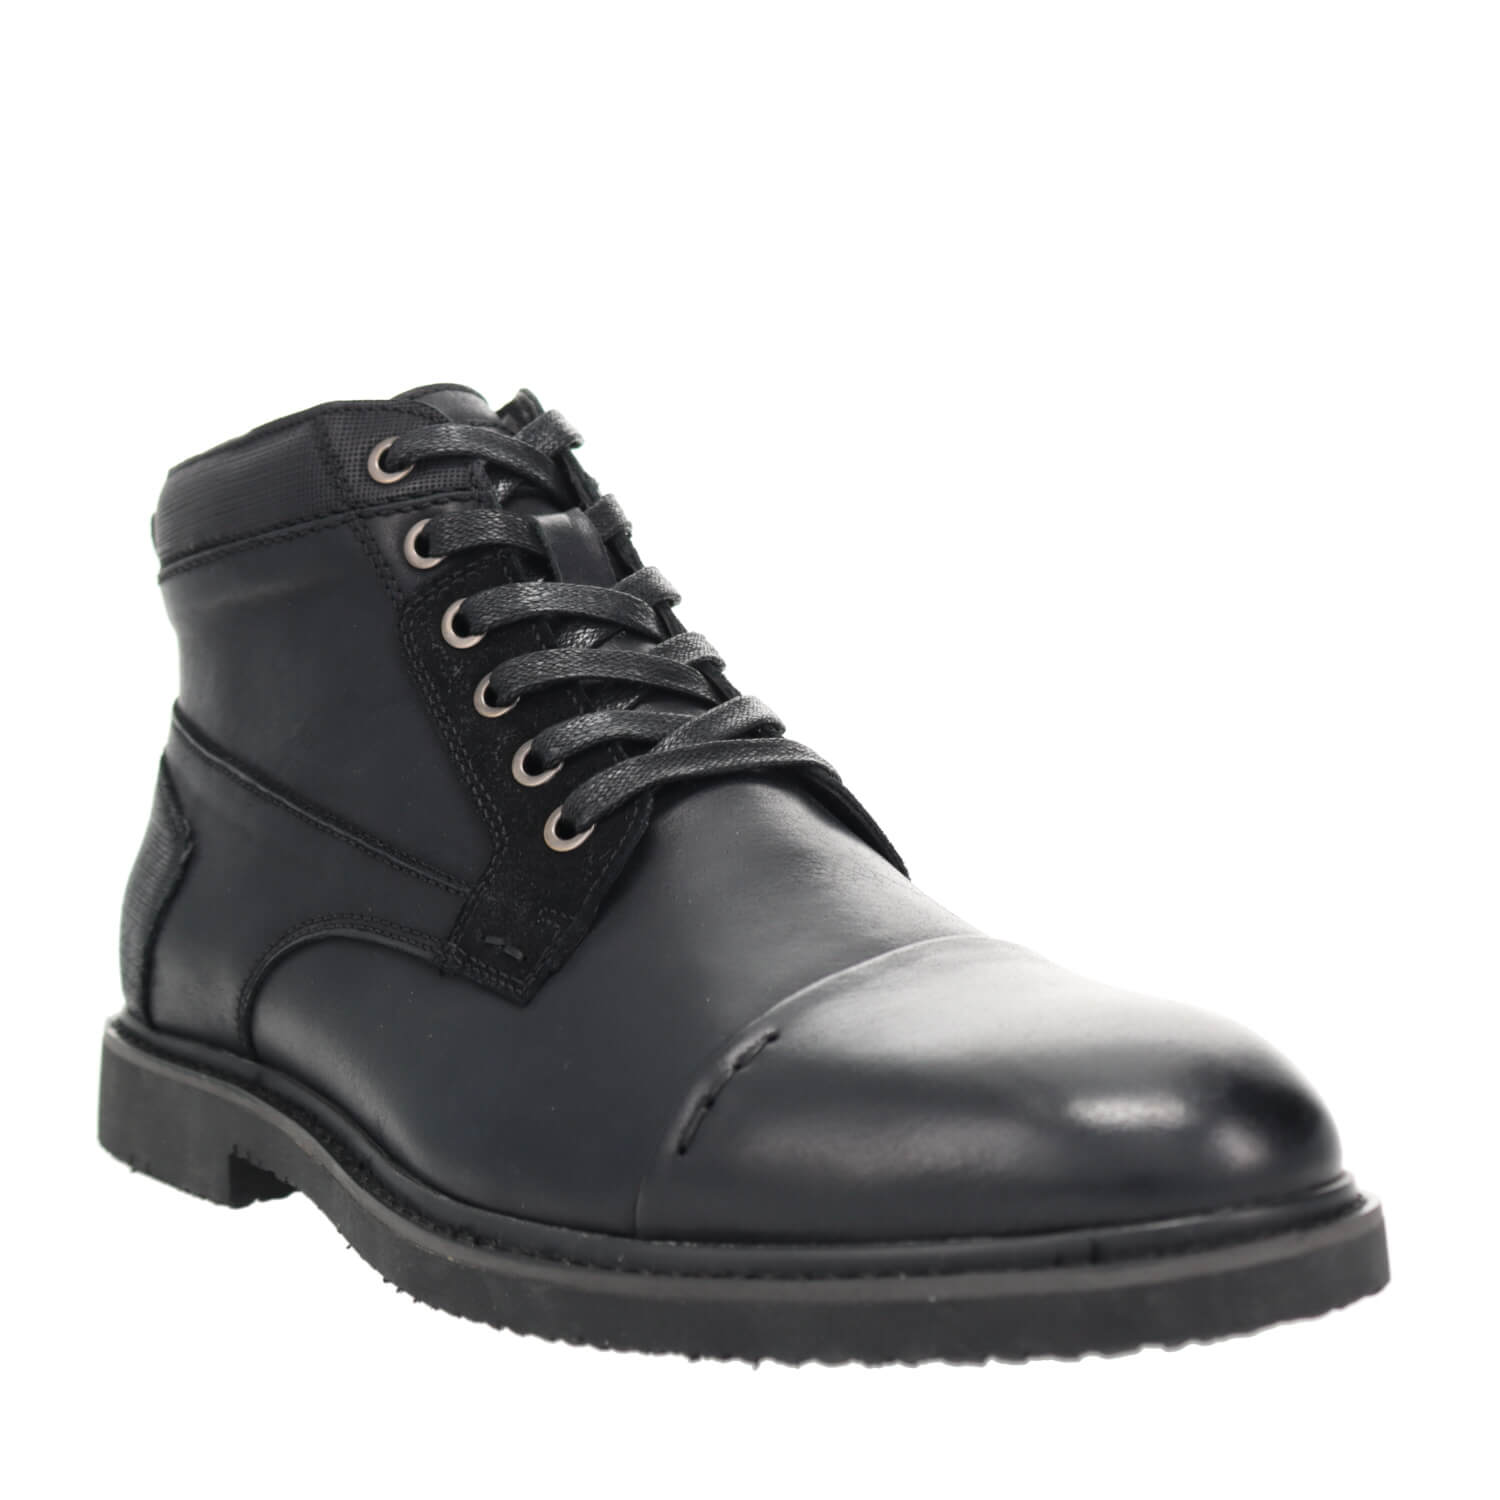 Prop?t Ford - Men's Leather Comfort Boots